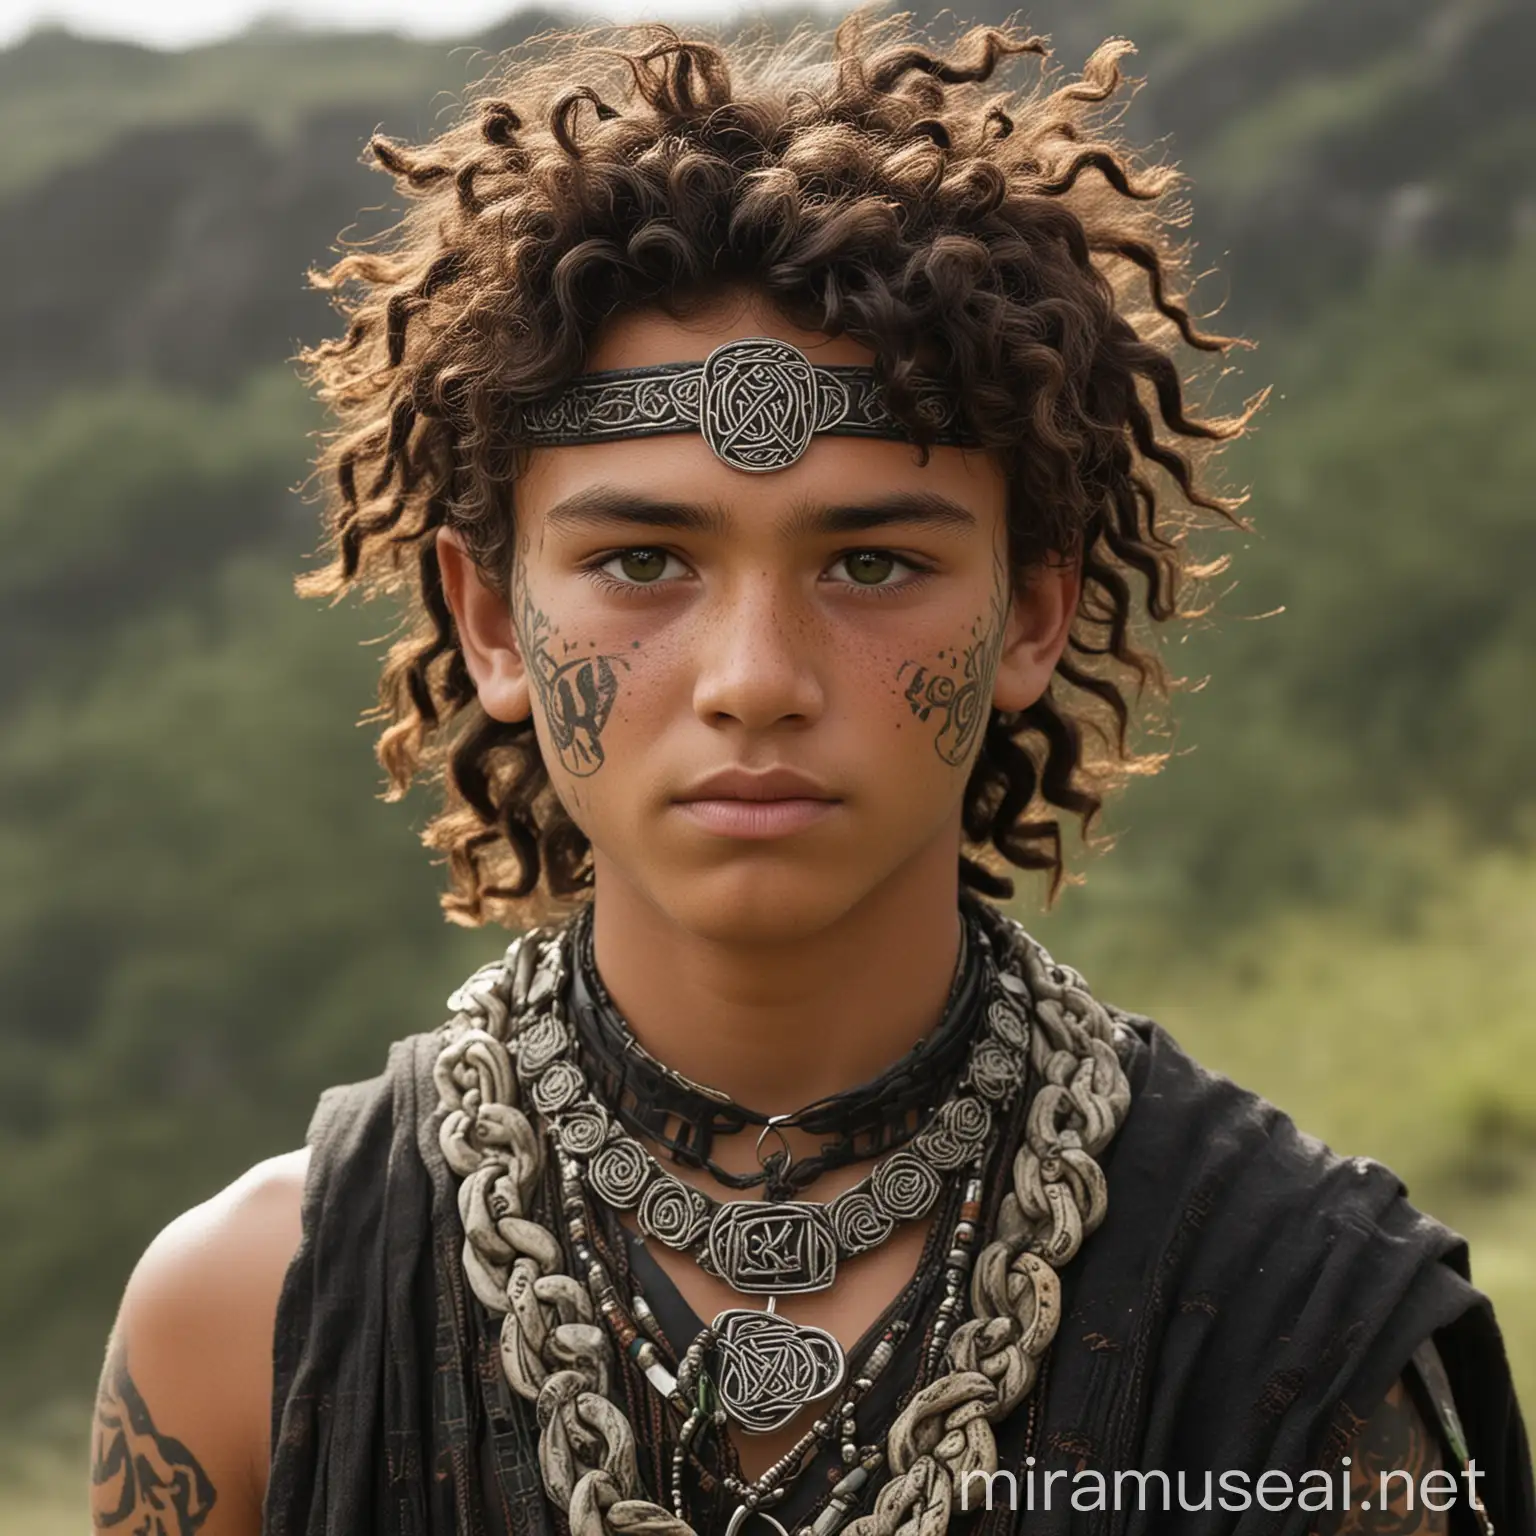 a boy 15 years old, melanin skin like a native mayan warrior, give him green eyes and freckles, give him wavy hair with coppor and black streaks, dress him in a an irish celtic druid attire, with a large mayan collar necklace made of stone carved with symbols